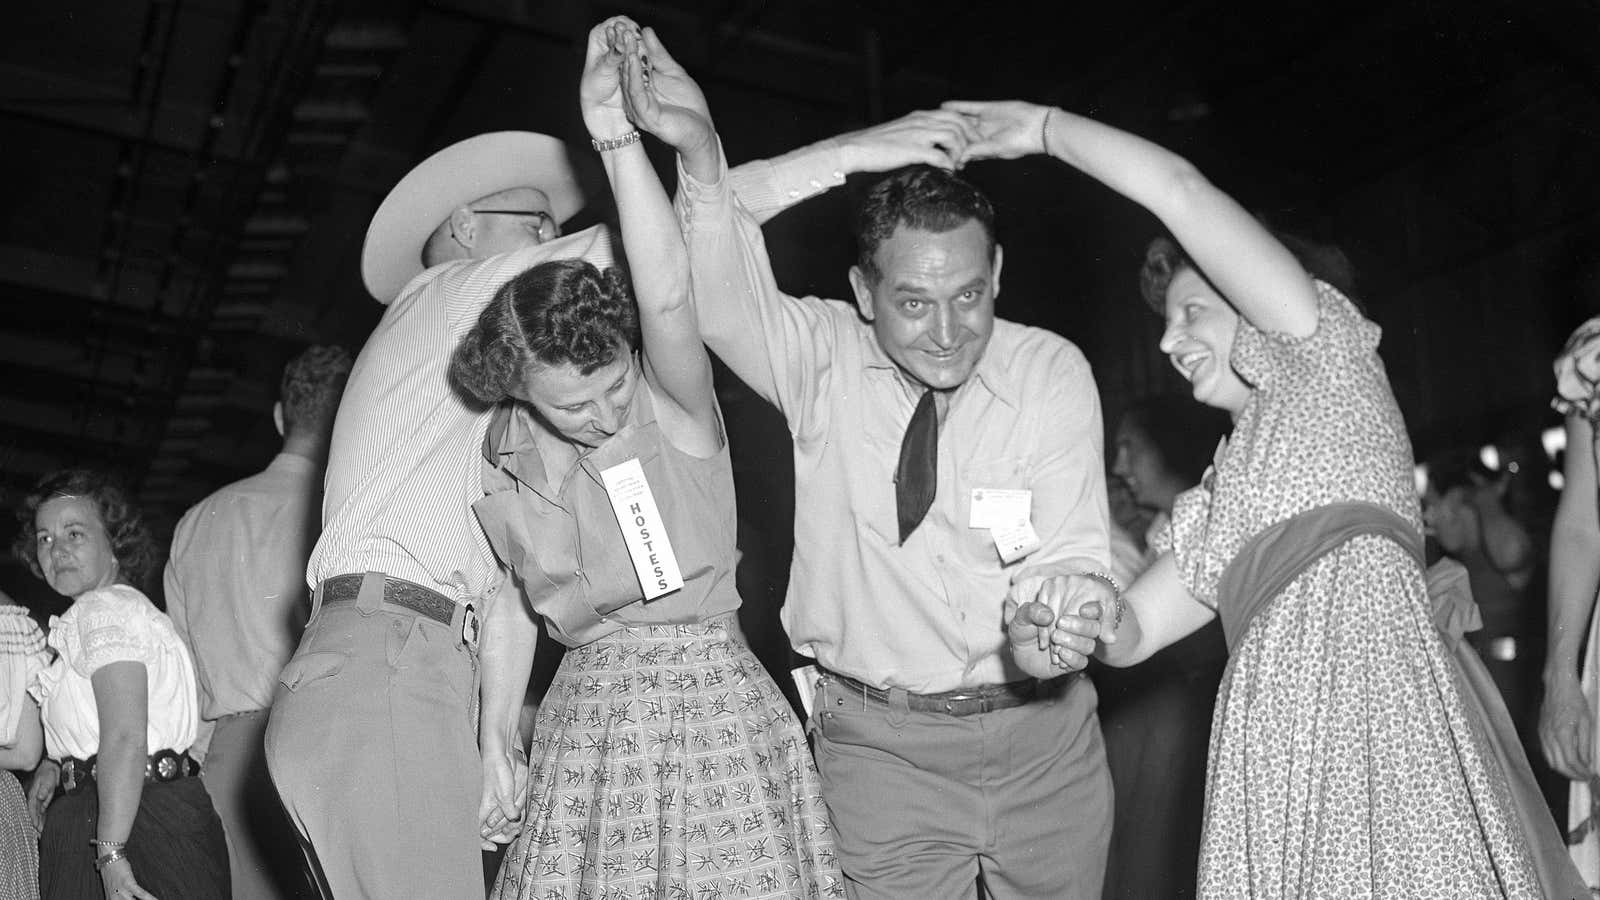 Americas wholesome square dancing tradition is a tool of white supremacy pic